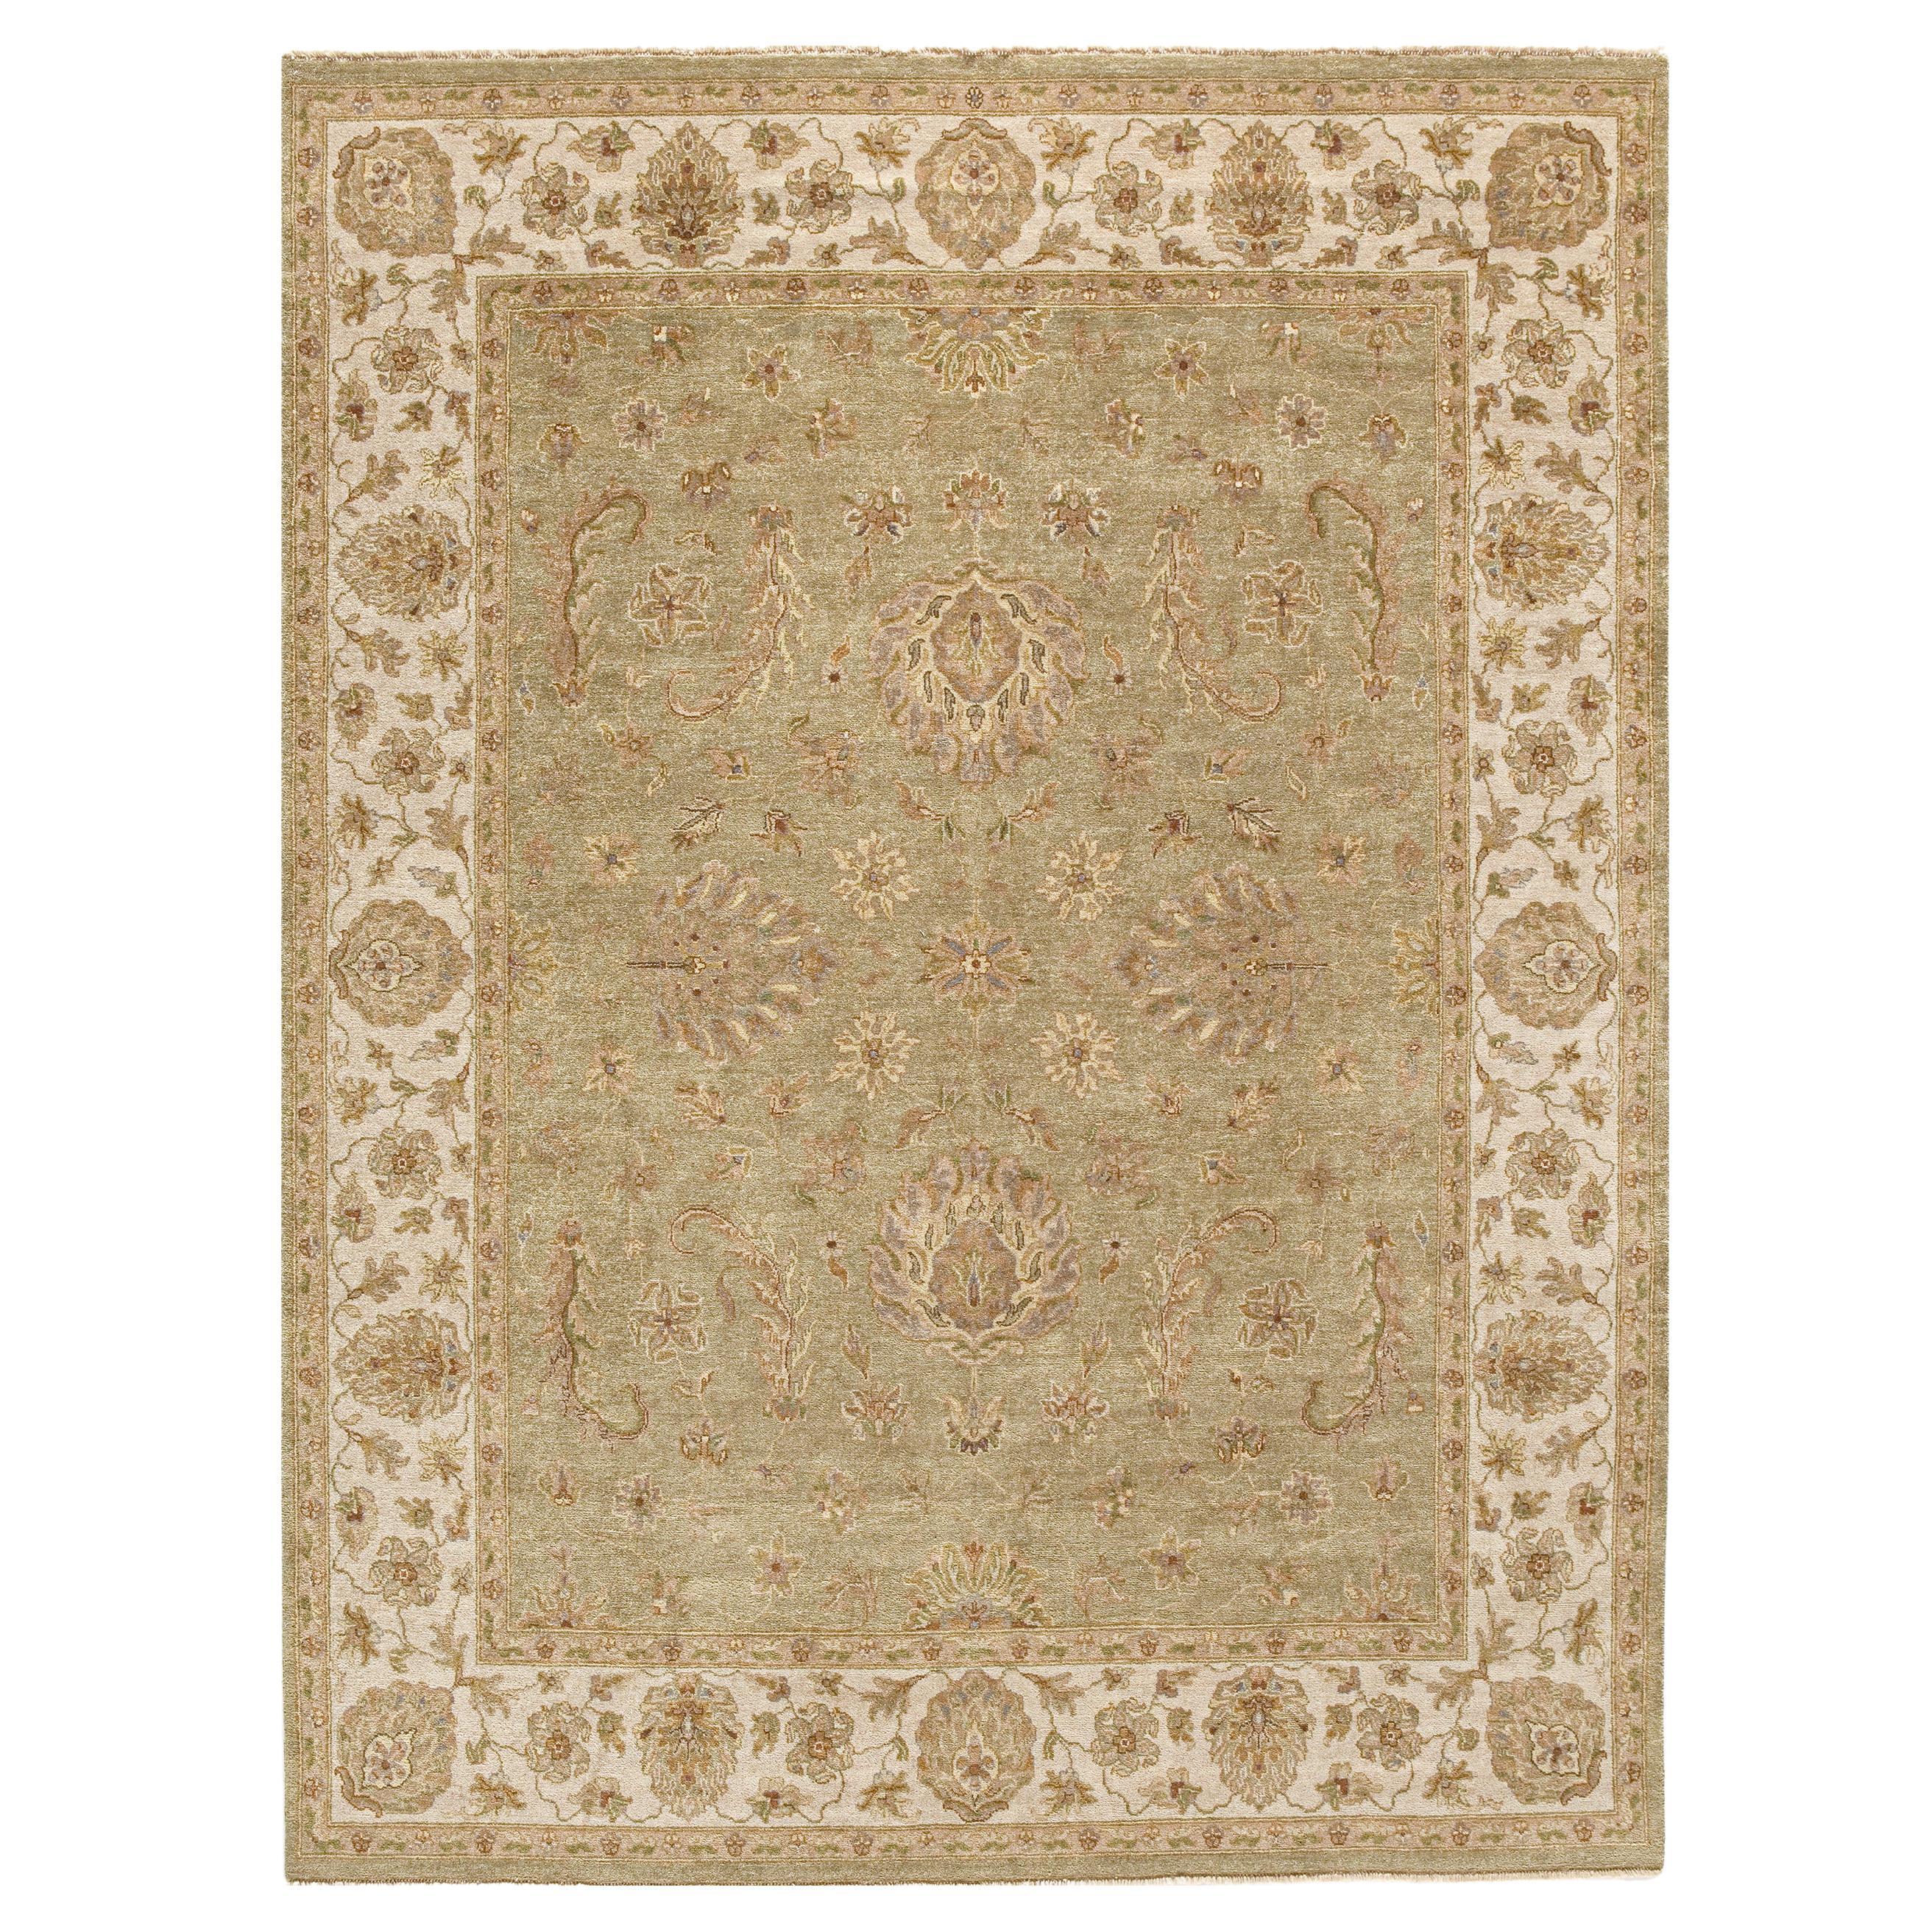 Luxury Traditional Hand-Knotted Amritsar Agra Lt. Green/Ivory 10x14 Rug